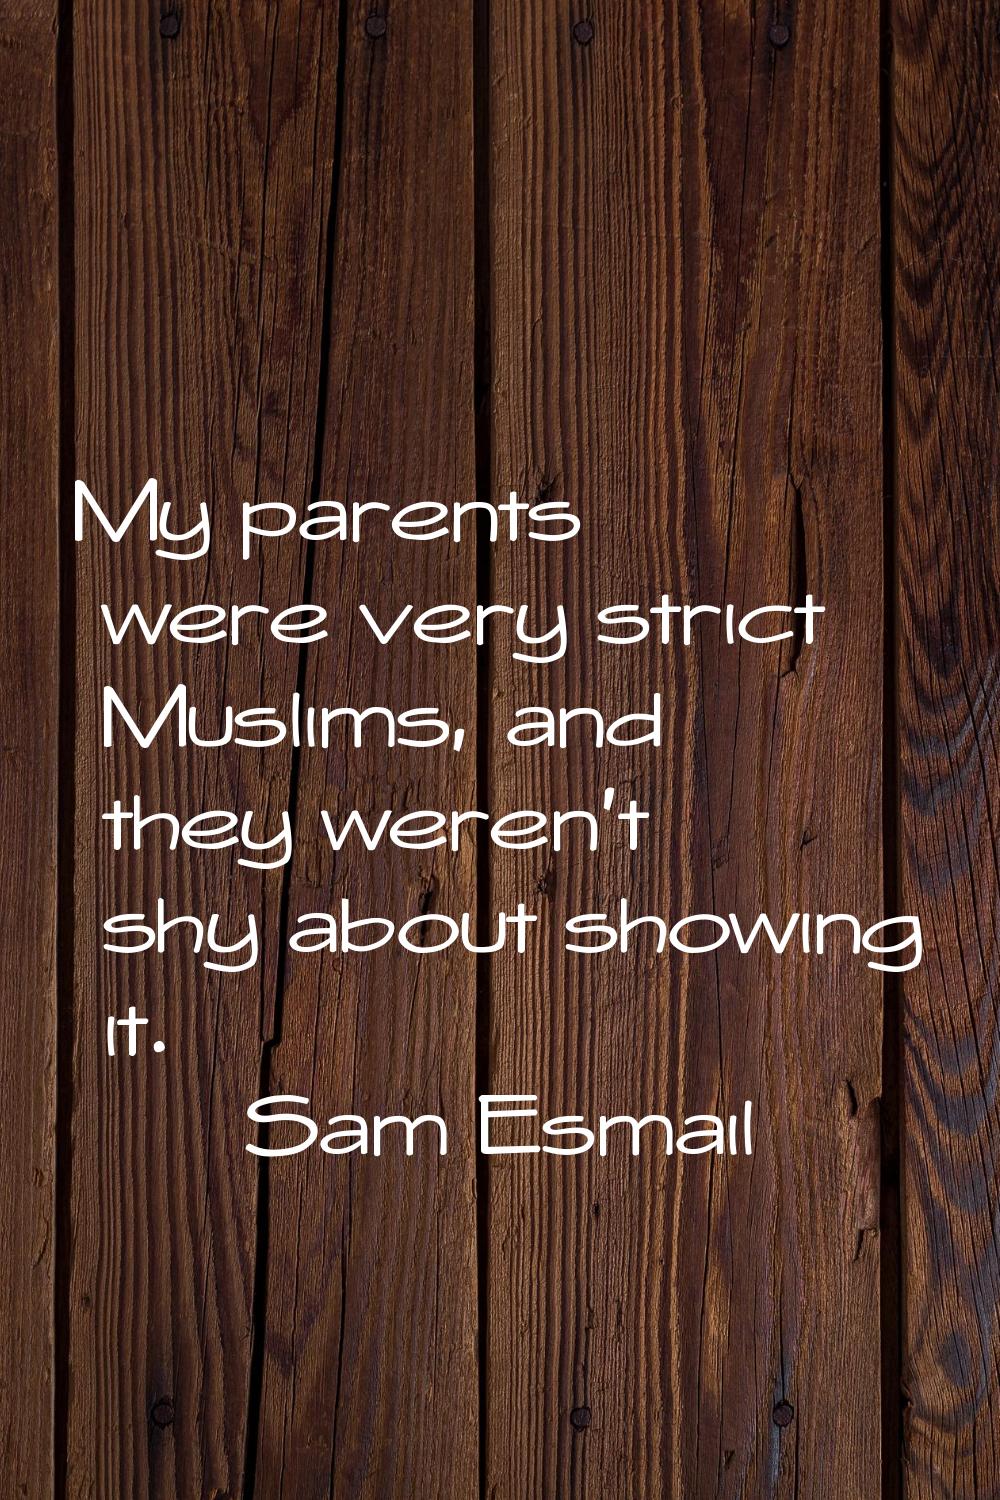 My parents were very strict Muslims, and they weren't shy about showing it.